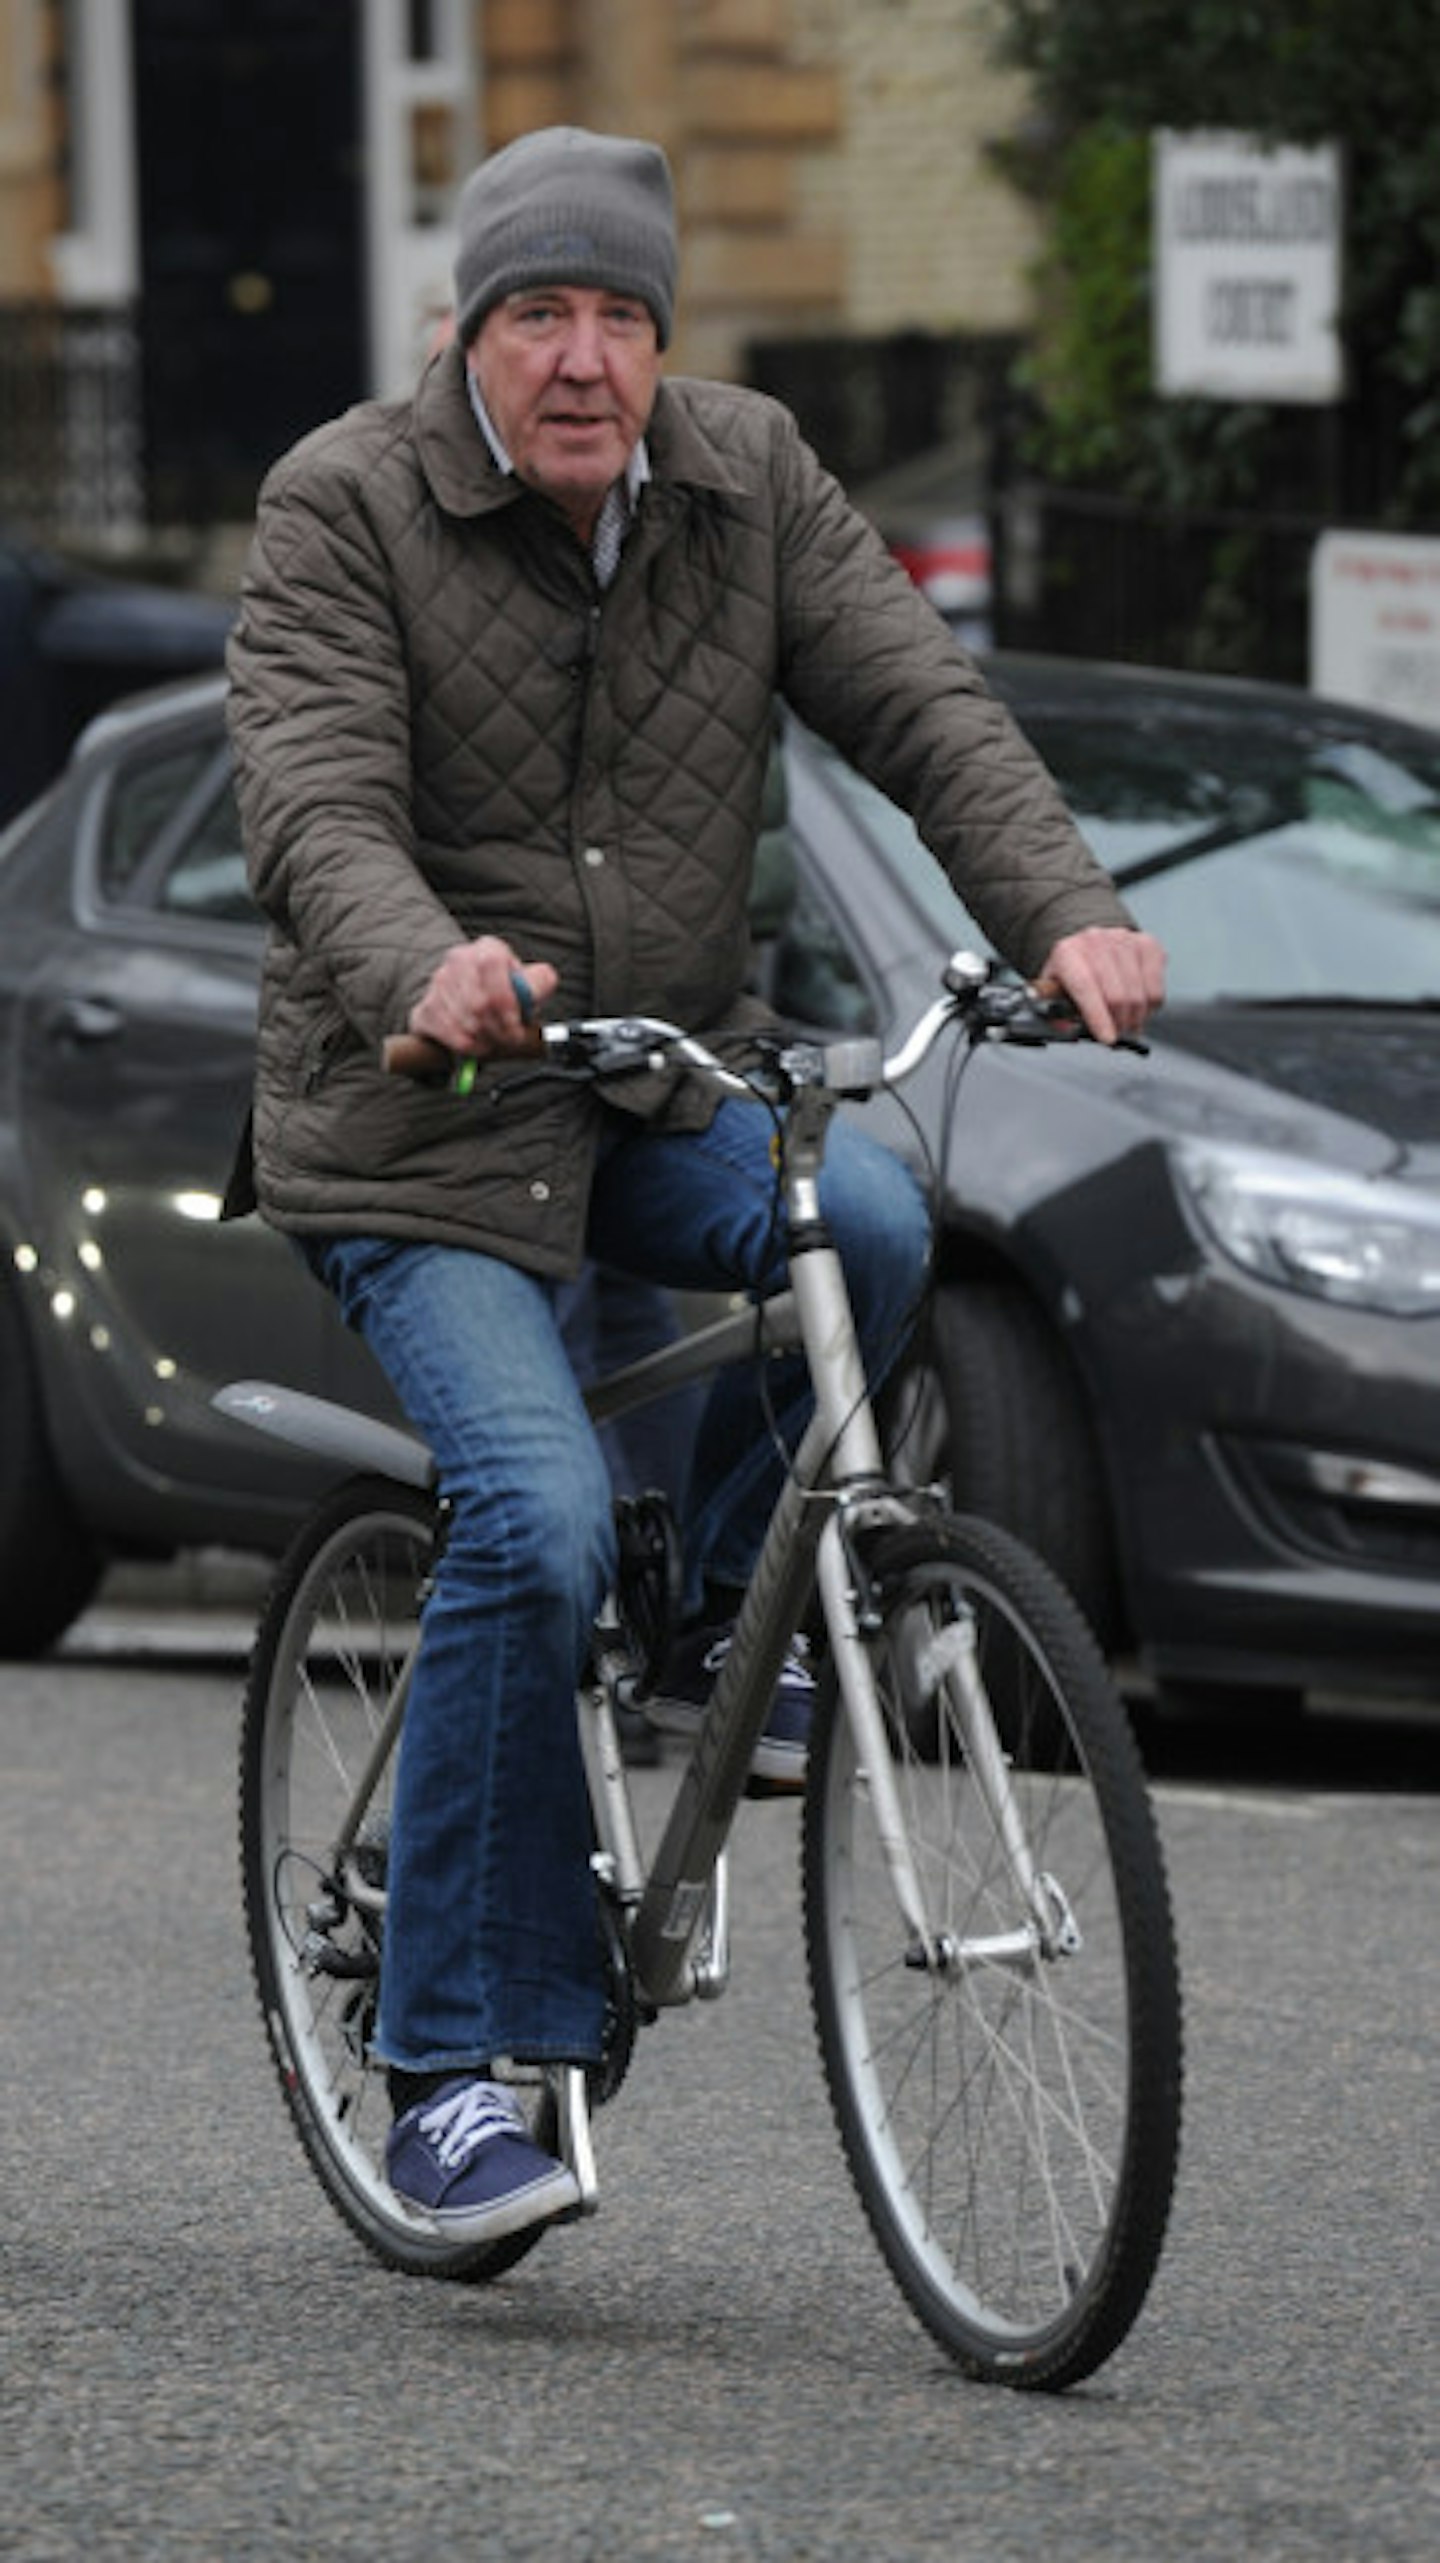 Clarkson swaps 4 wheels for 2 wheels following his sacking from Top Gear